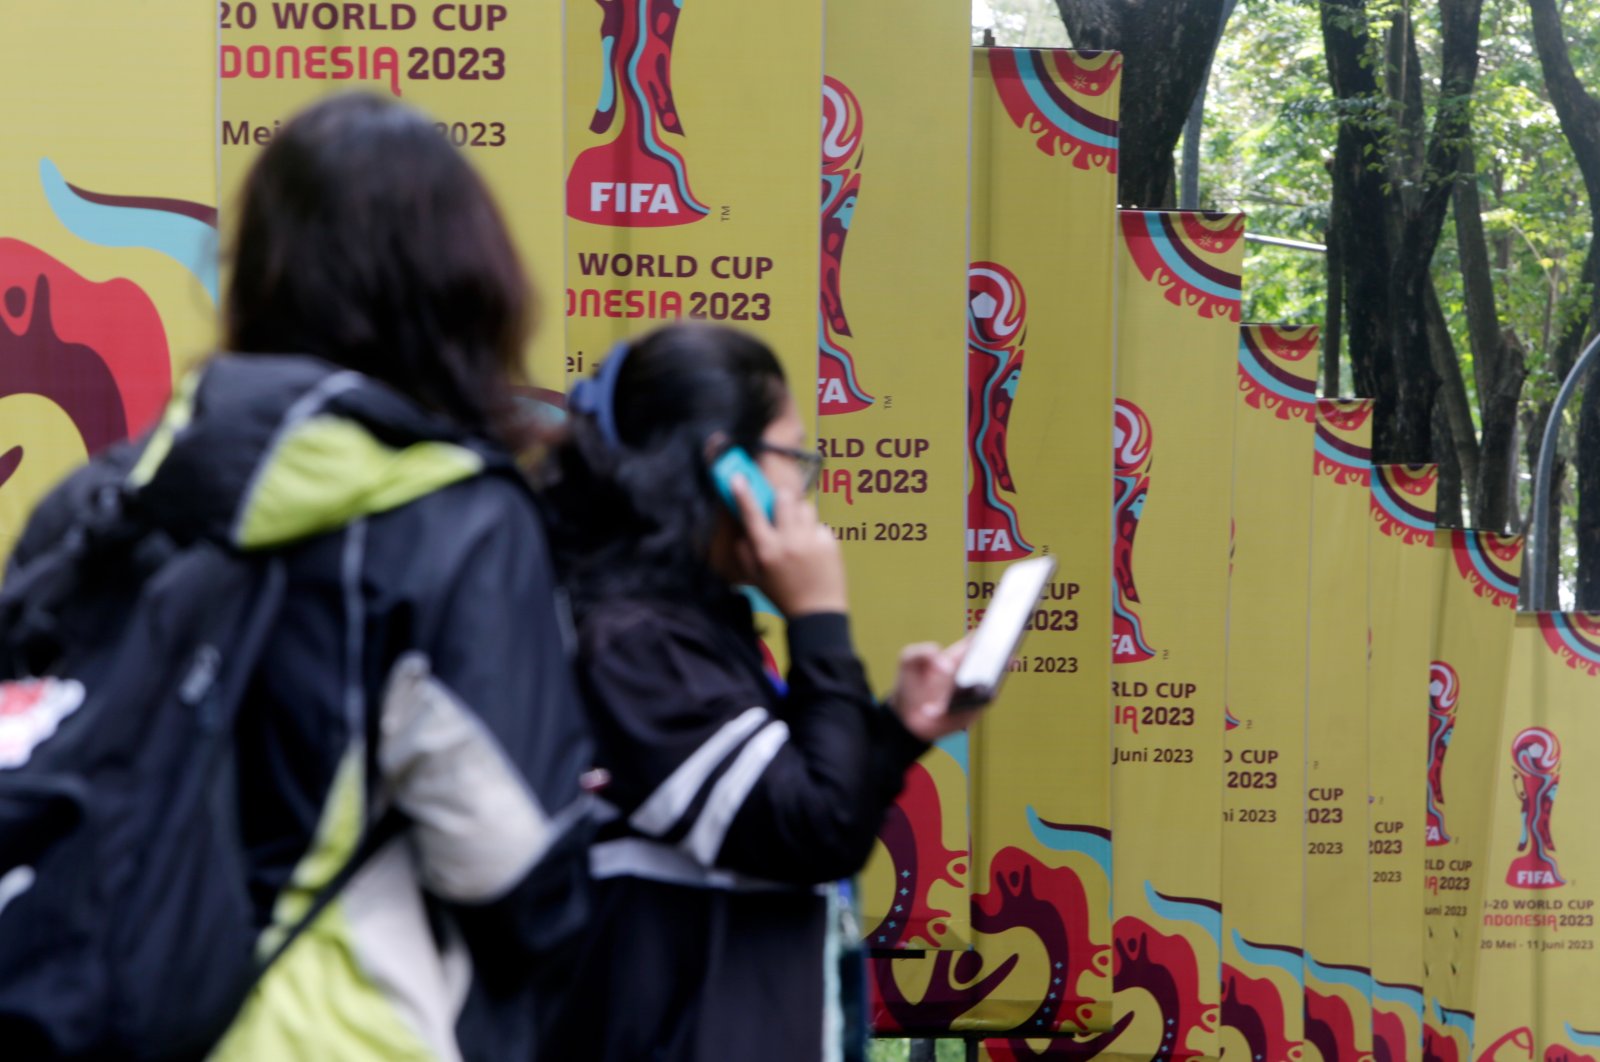 Workers stand in front of U-20 World Cup banners following FIFA revoking Indonesia&#039;s hosting status for the 2023 U-20 World Cup, at a sport arena, Jakarta, Indonesia, March 30, 2023. (EPA Photo)